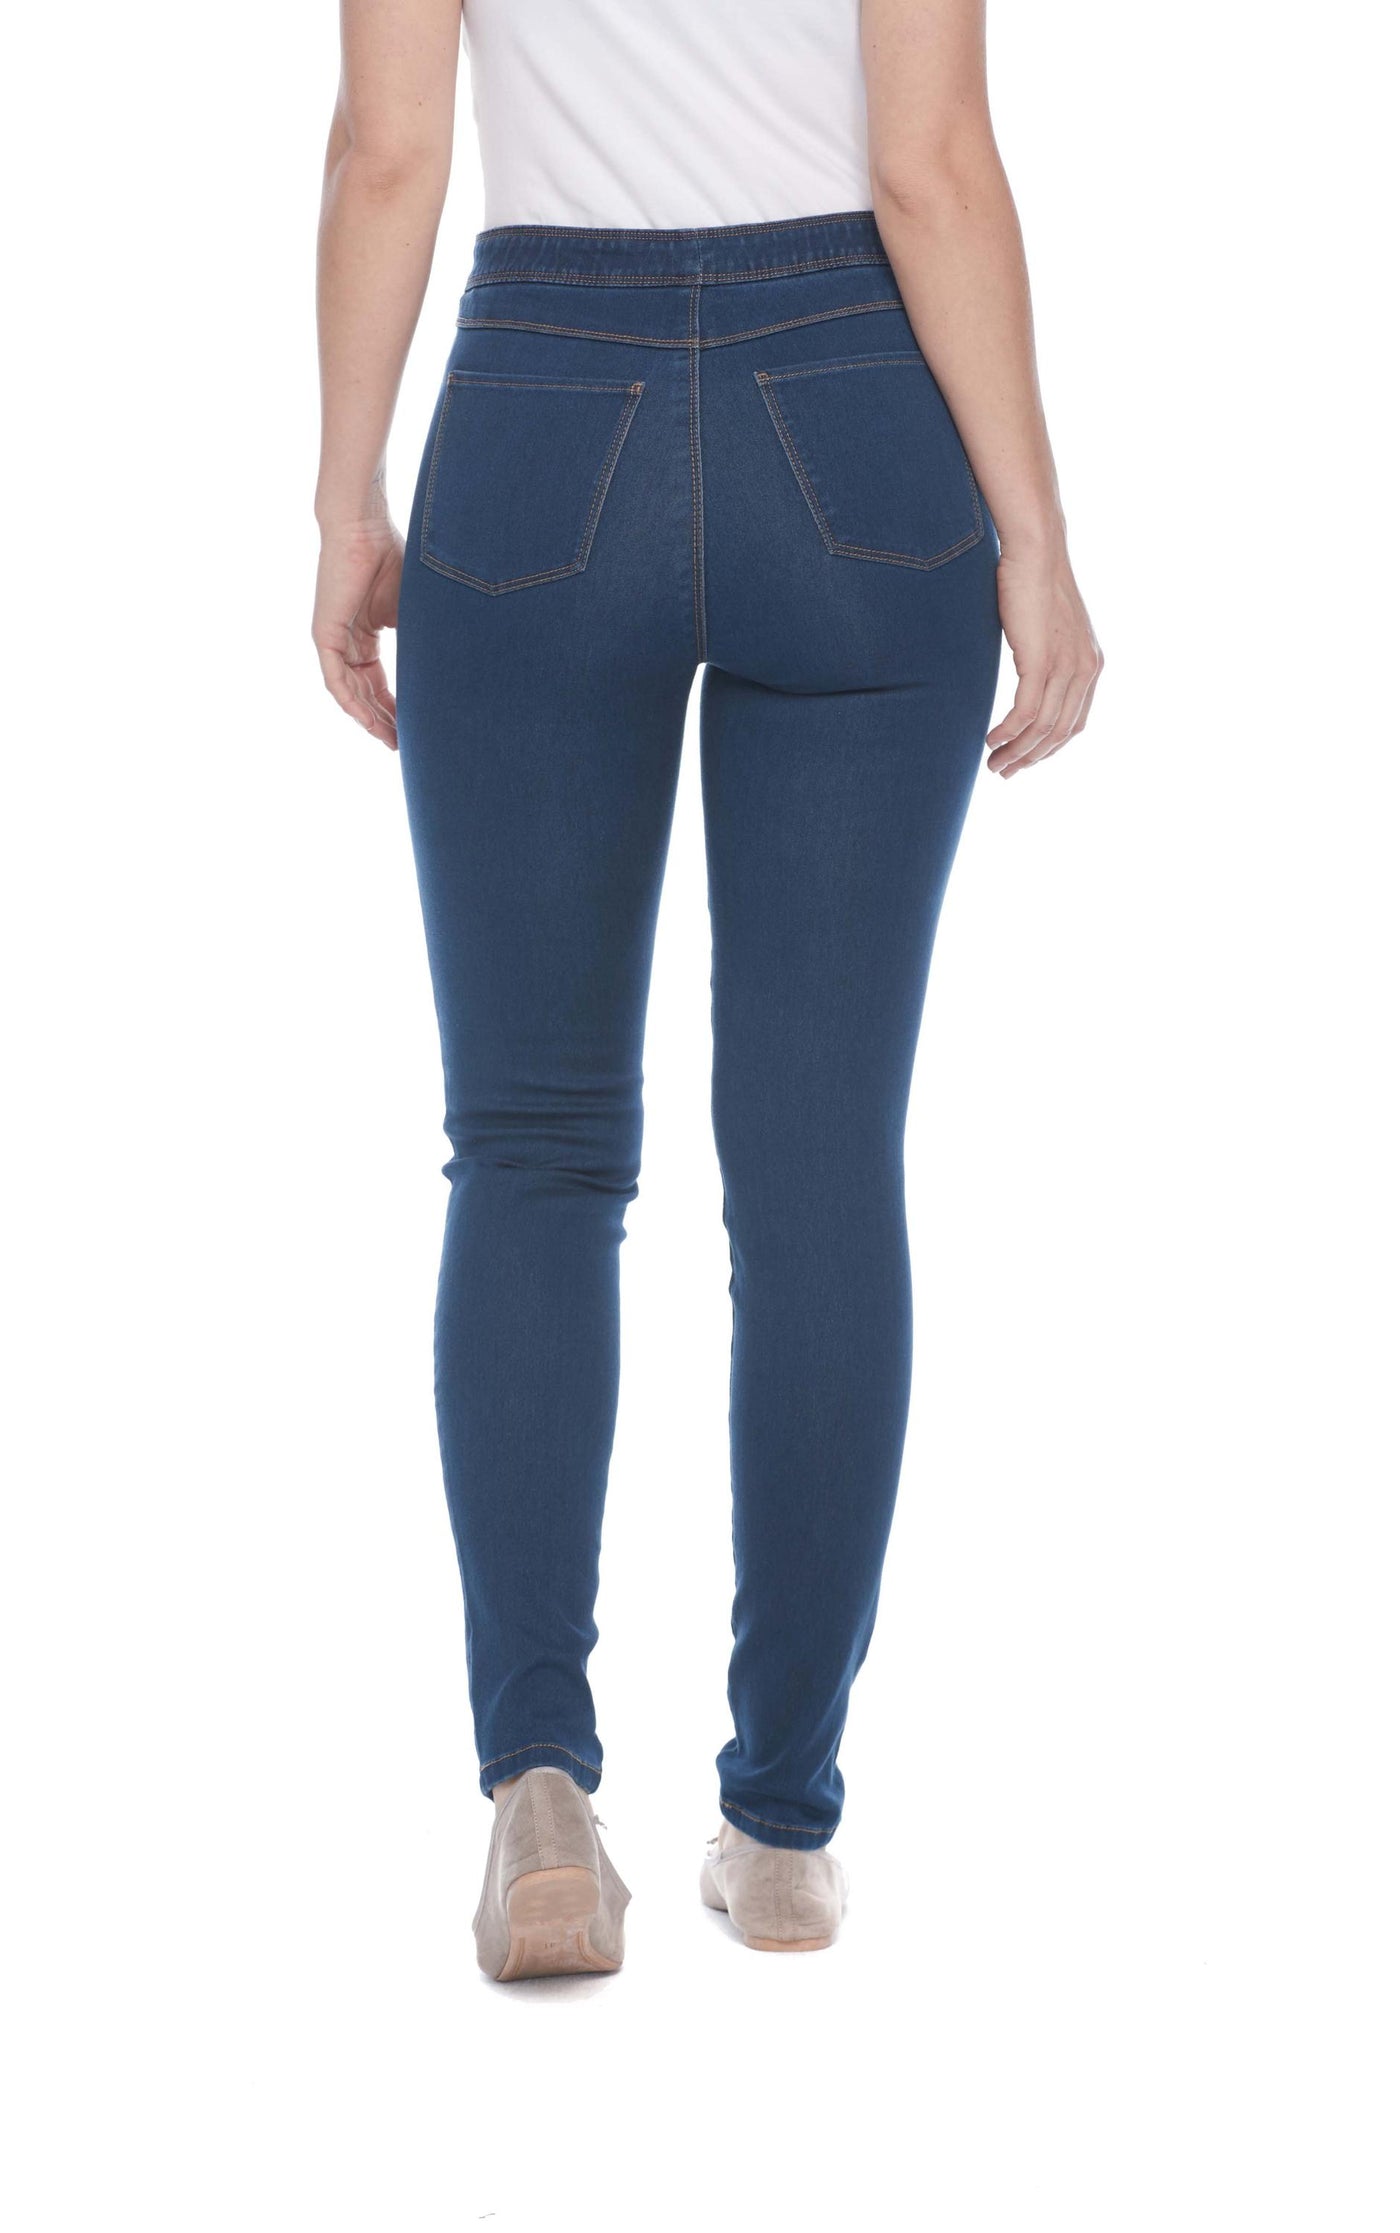 Pull-On Slim Jegging Style 272506N D-LUX Denim French Dressing Jeans